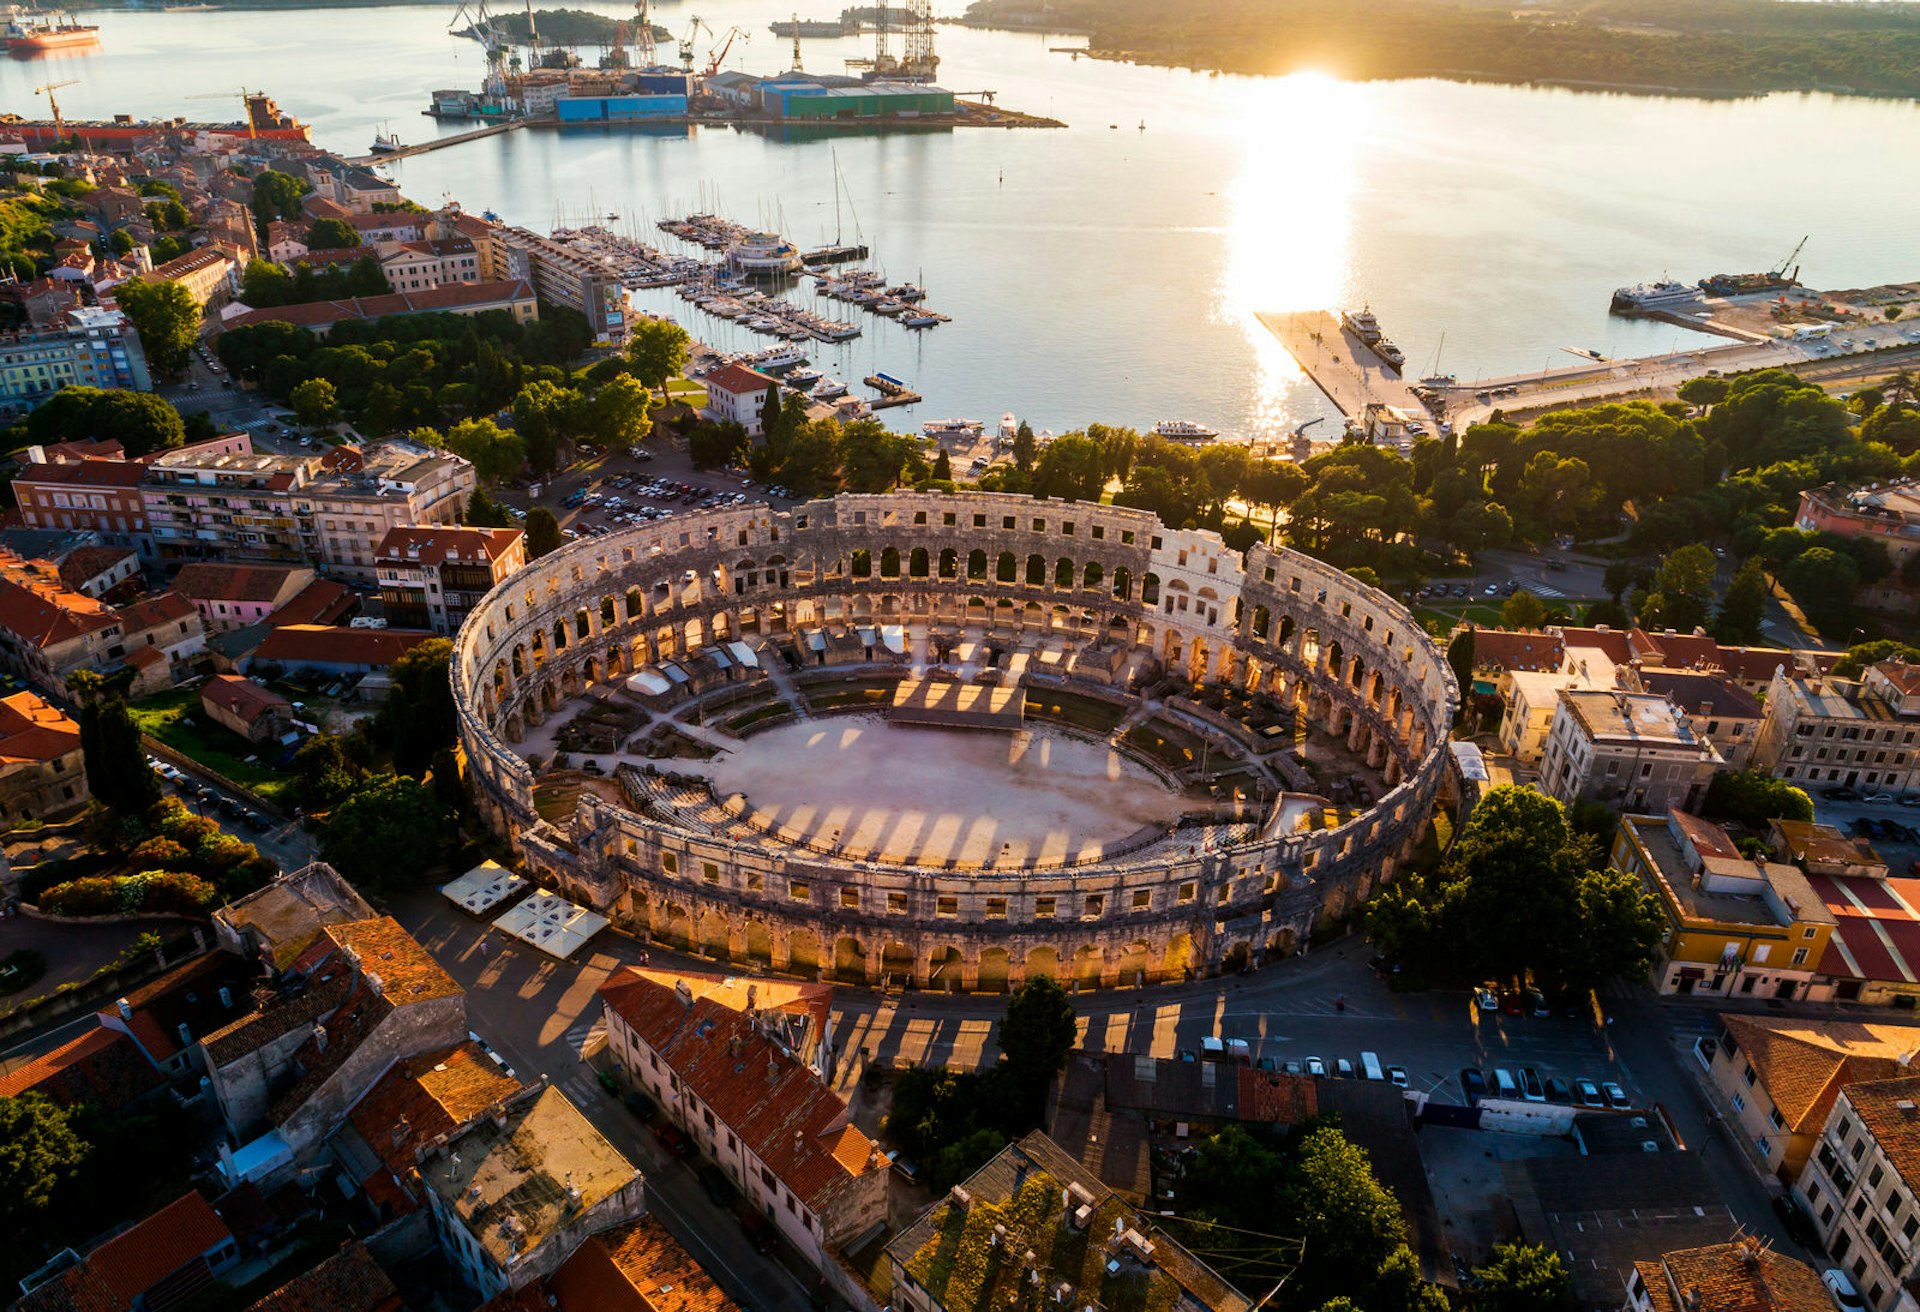 Pula Arena, Croatia, at sunset. The ruins of the Roman amphitheater are very well preserved. The circular structure is surrounded by houses with a glistening body of water beyond